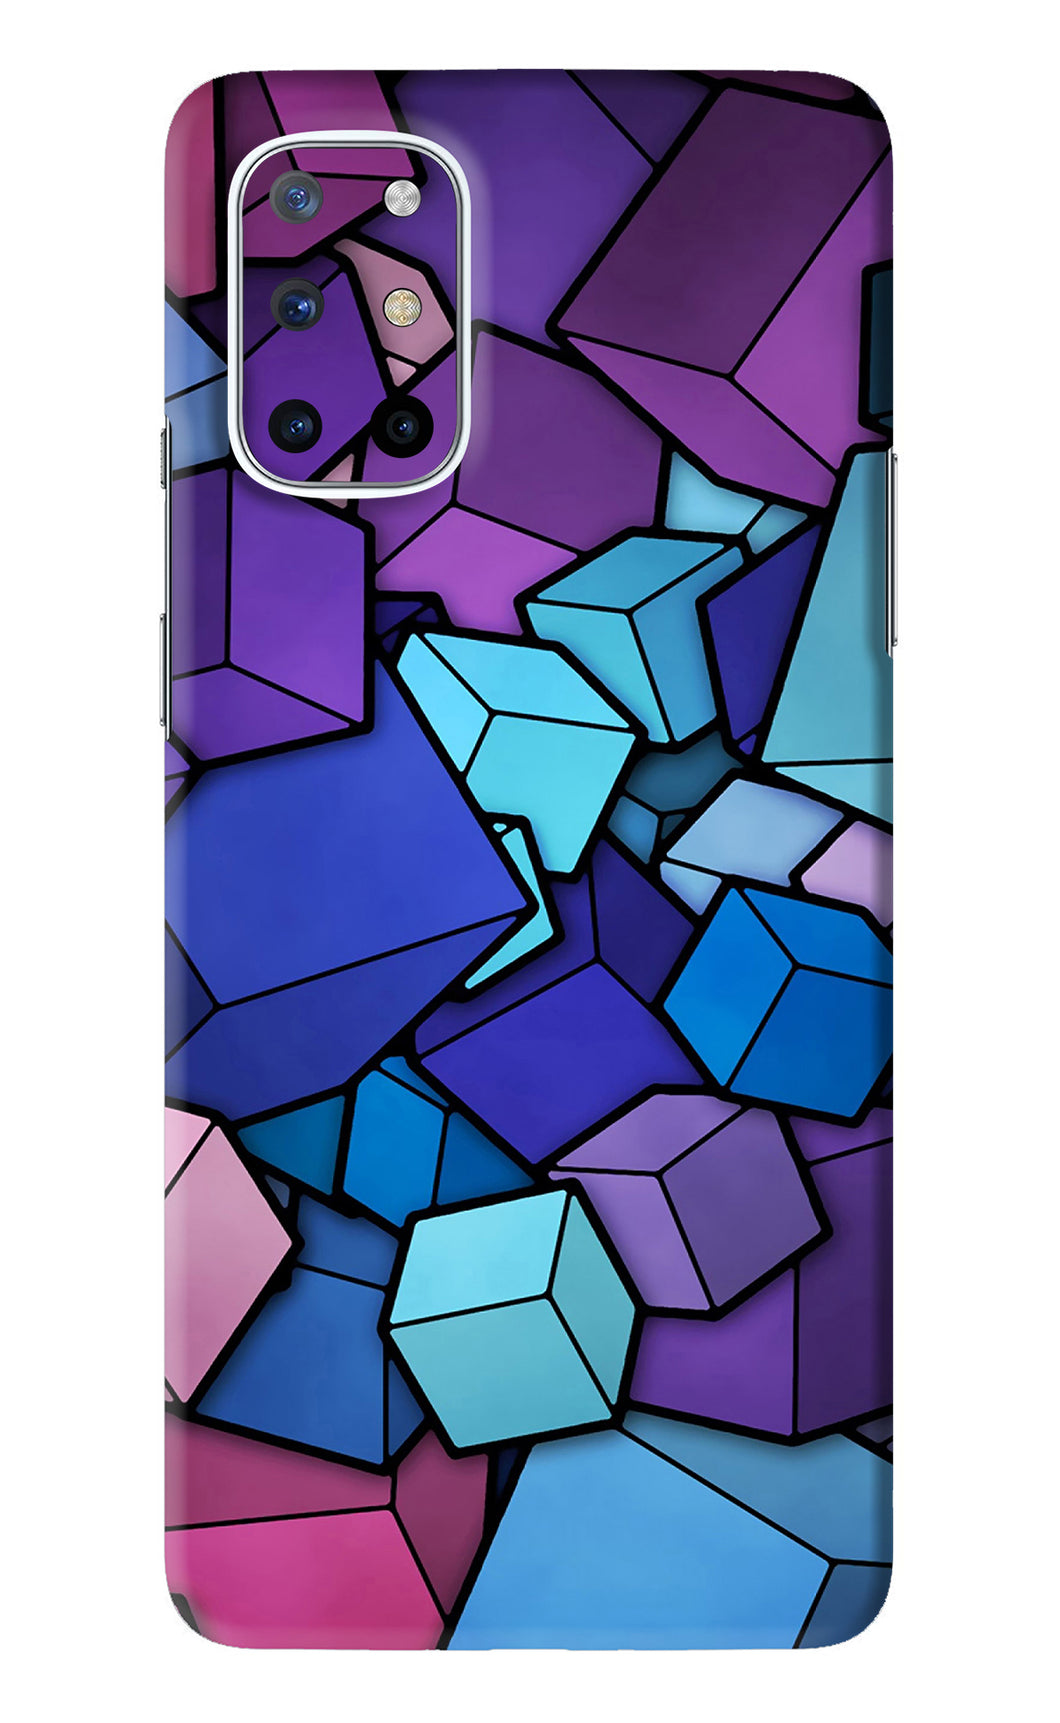 Cubic Abstract OnePlus 8T Back Skin Wrap